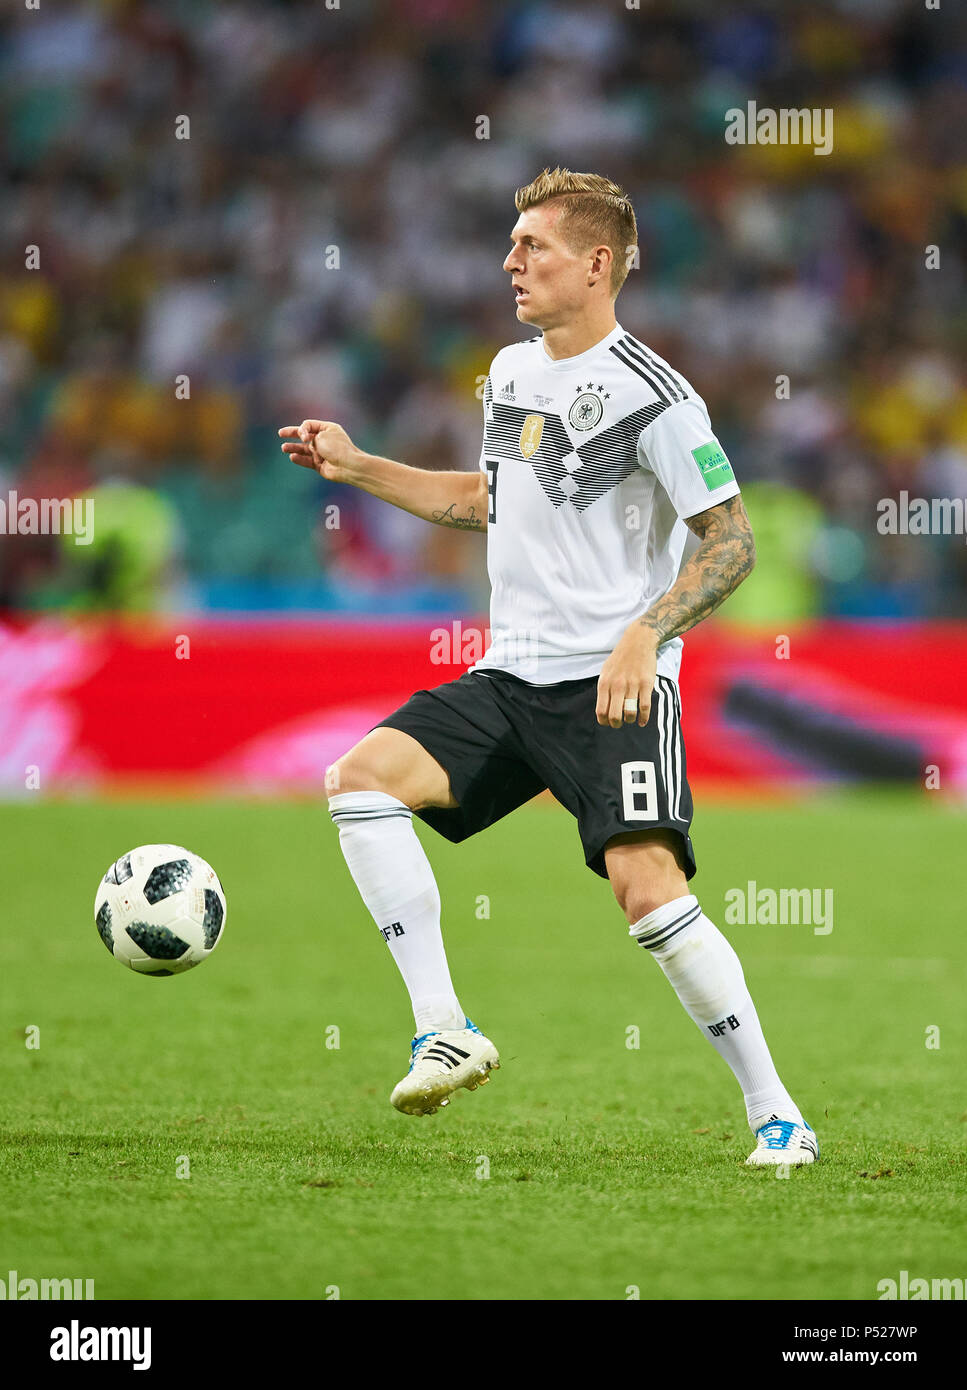 Germany - Sweden, Soccer, Sochi, June 23, 2018 Toni KROOS, DFB 8  GERMANY - SWEDEN 2-1 FIFA WORLD CUP 2018 RUSSIA, Group F, Season 2018/2019,  June 23, 2018  Fisht Olympic Stadium in Sotchi, Russia.  © Peter Schatz / Alamy Live News Stock Photo